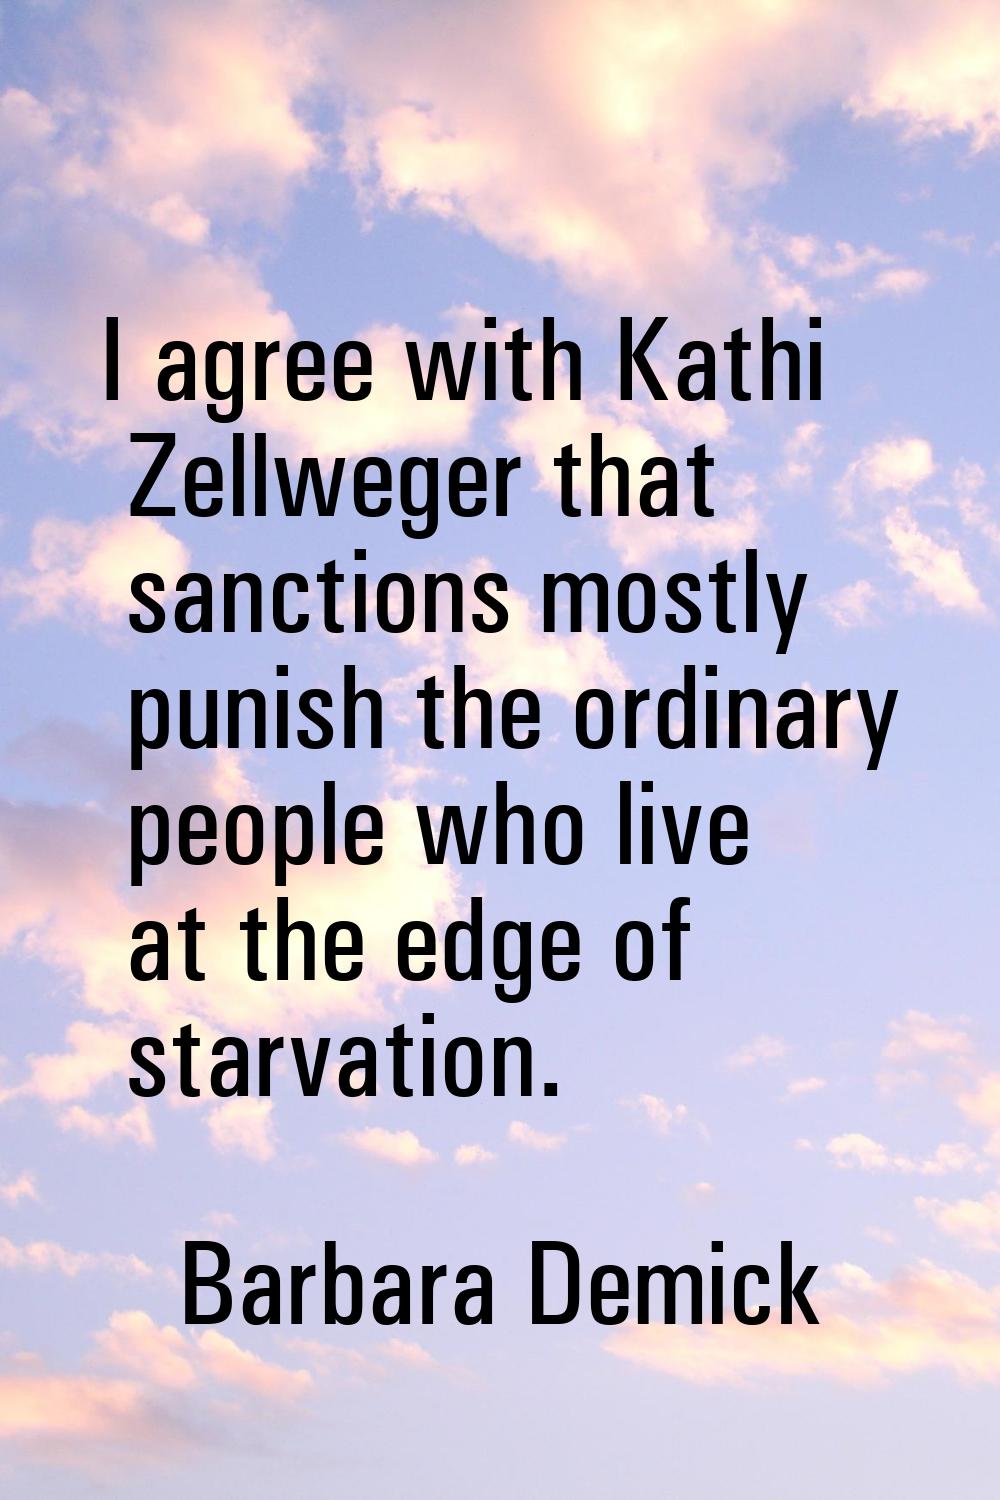 I agree with Kathi Zellweger that sanctions mostly punish the ordinary people who live at the edge 